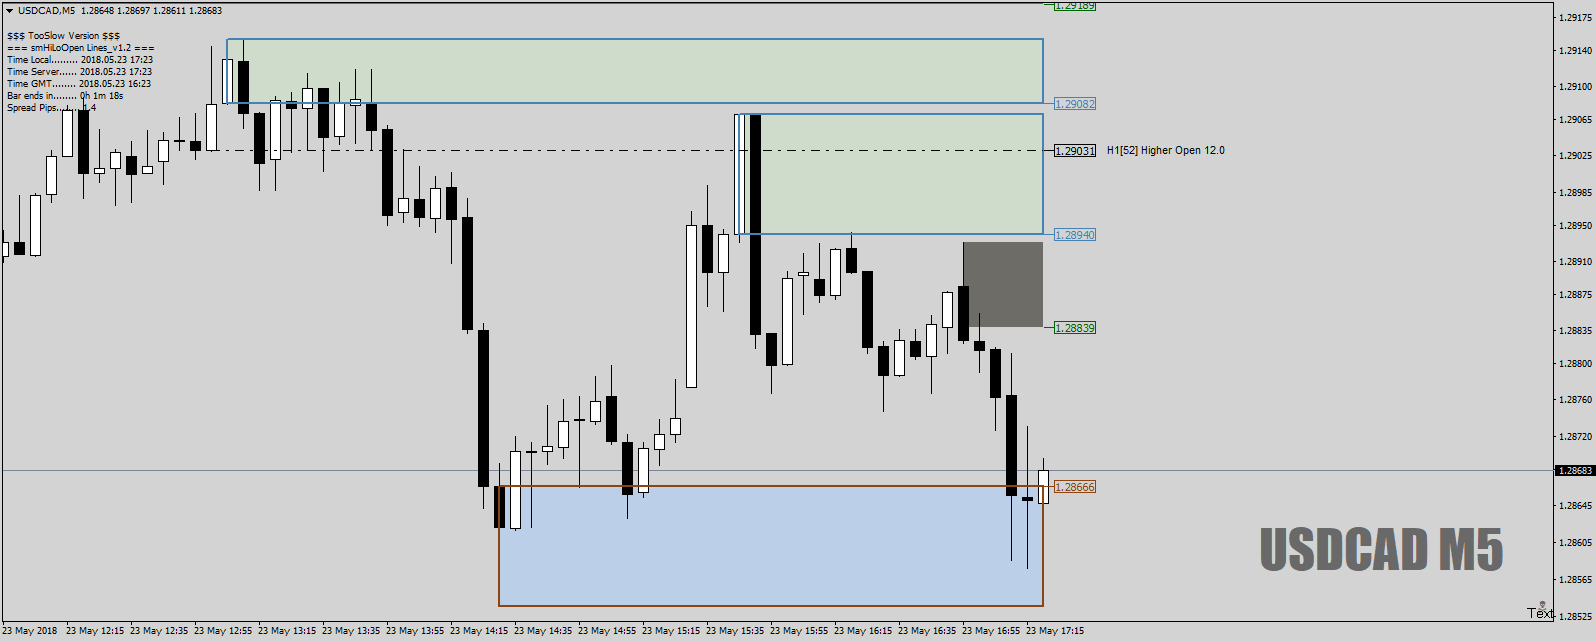 USDCADM5tookastheHOLOlet1-2-3go23rdMay18clearerview.png